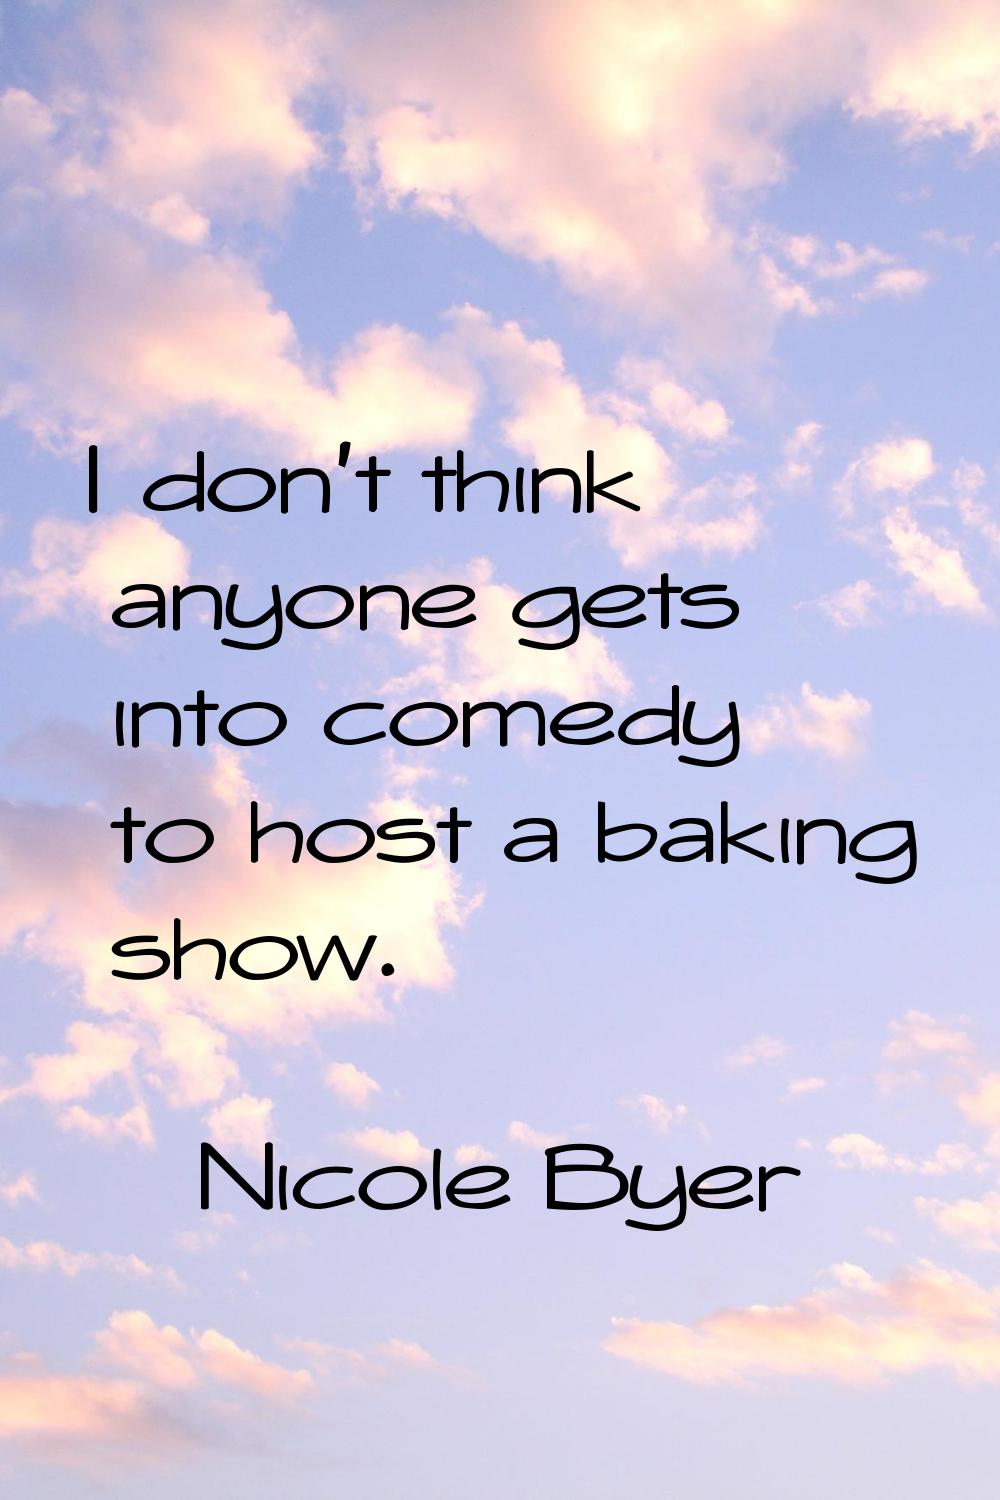 I don't think anyone gets into comedy to host a baking show.